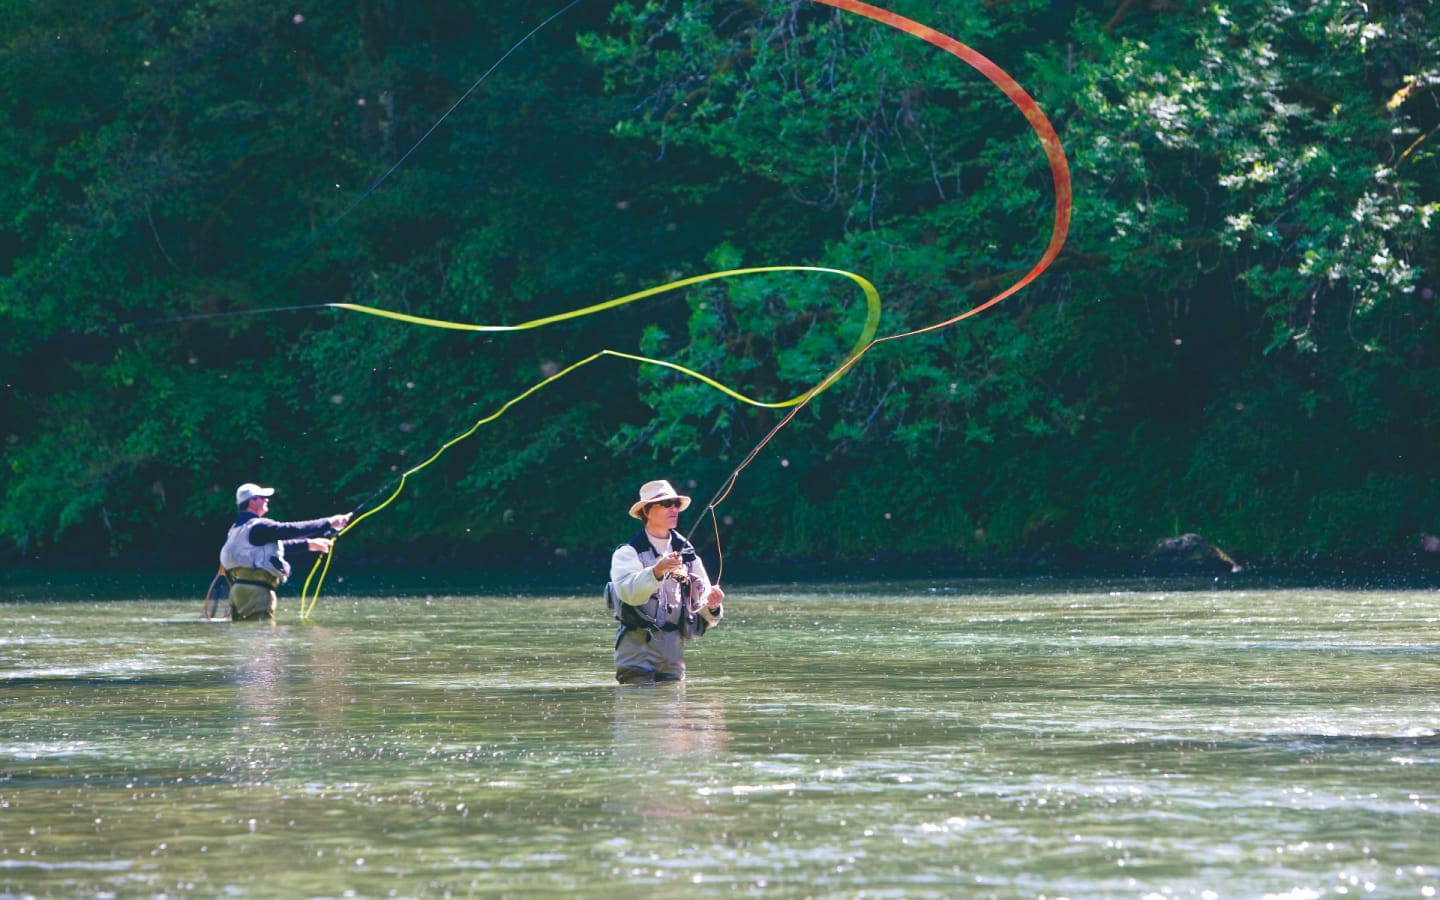 Fishing in the rivers of the Doubs